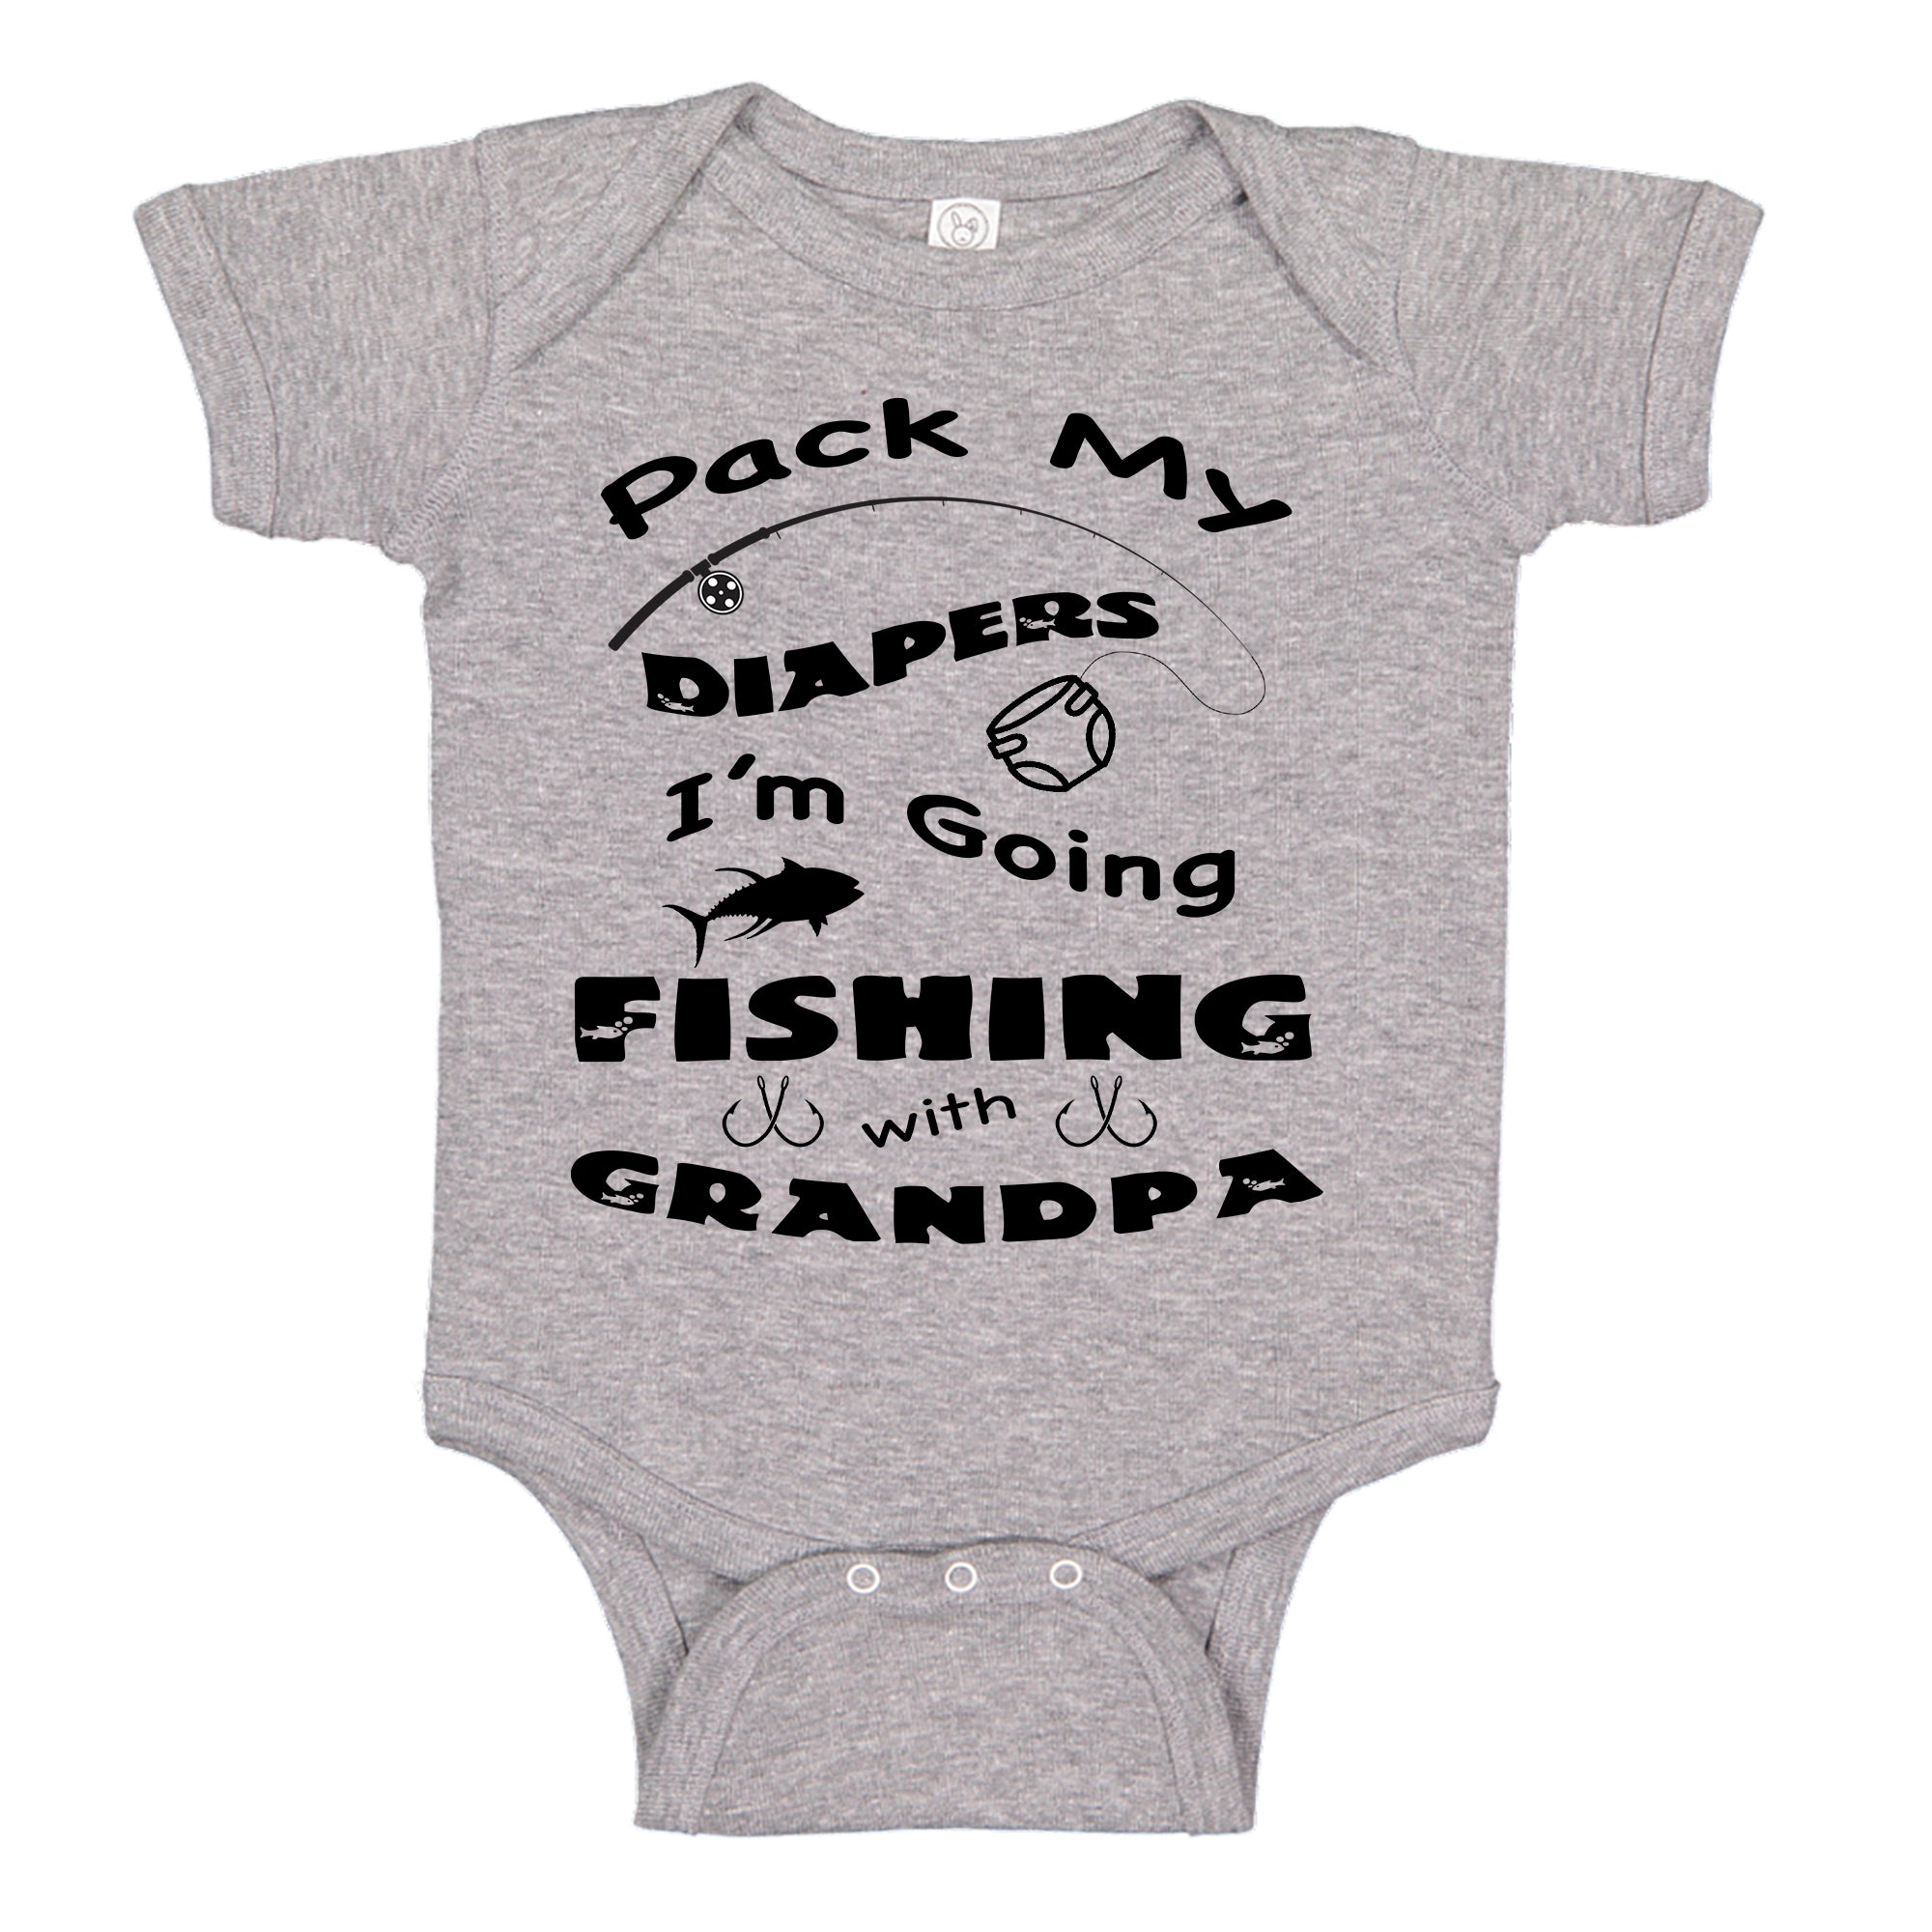 Pack My Diapers I'm Going Fishing With Daddy Onesie